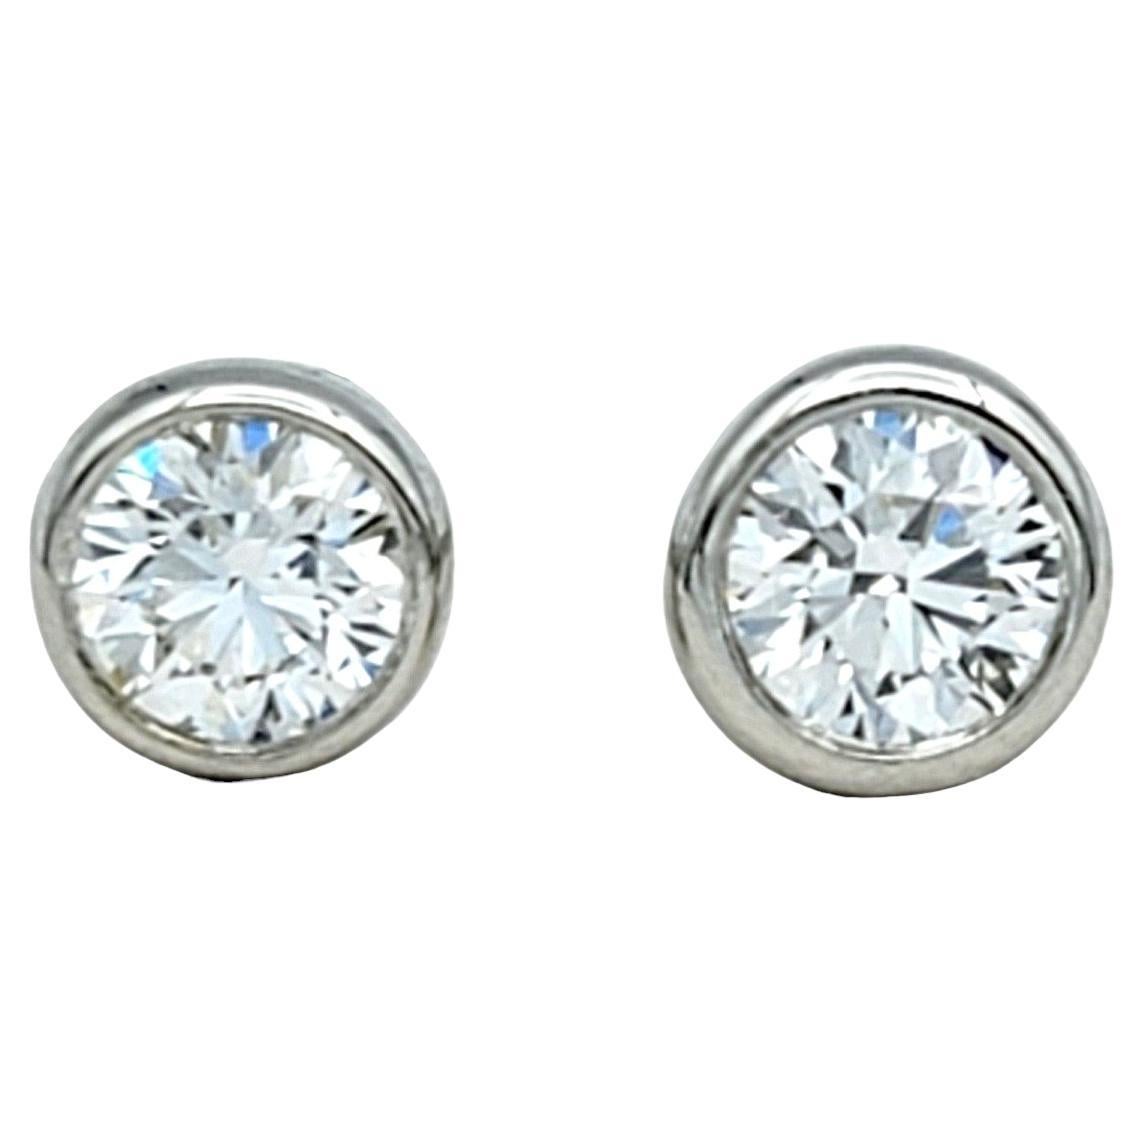 Tiffany & Co. Elsa Peretti Diamonds by the Yard Stud Earrings Set in Platinum For Sale